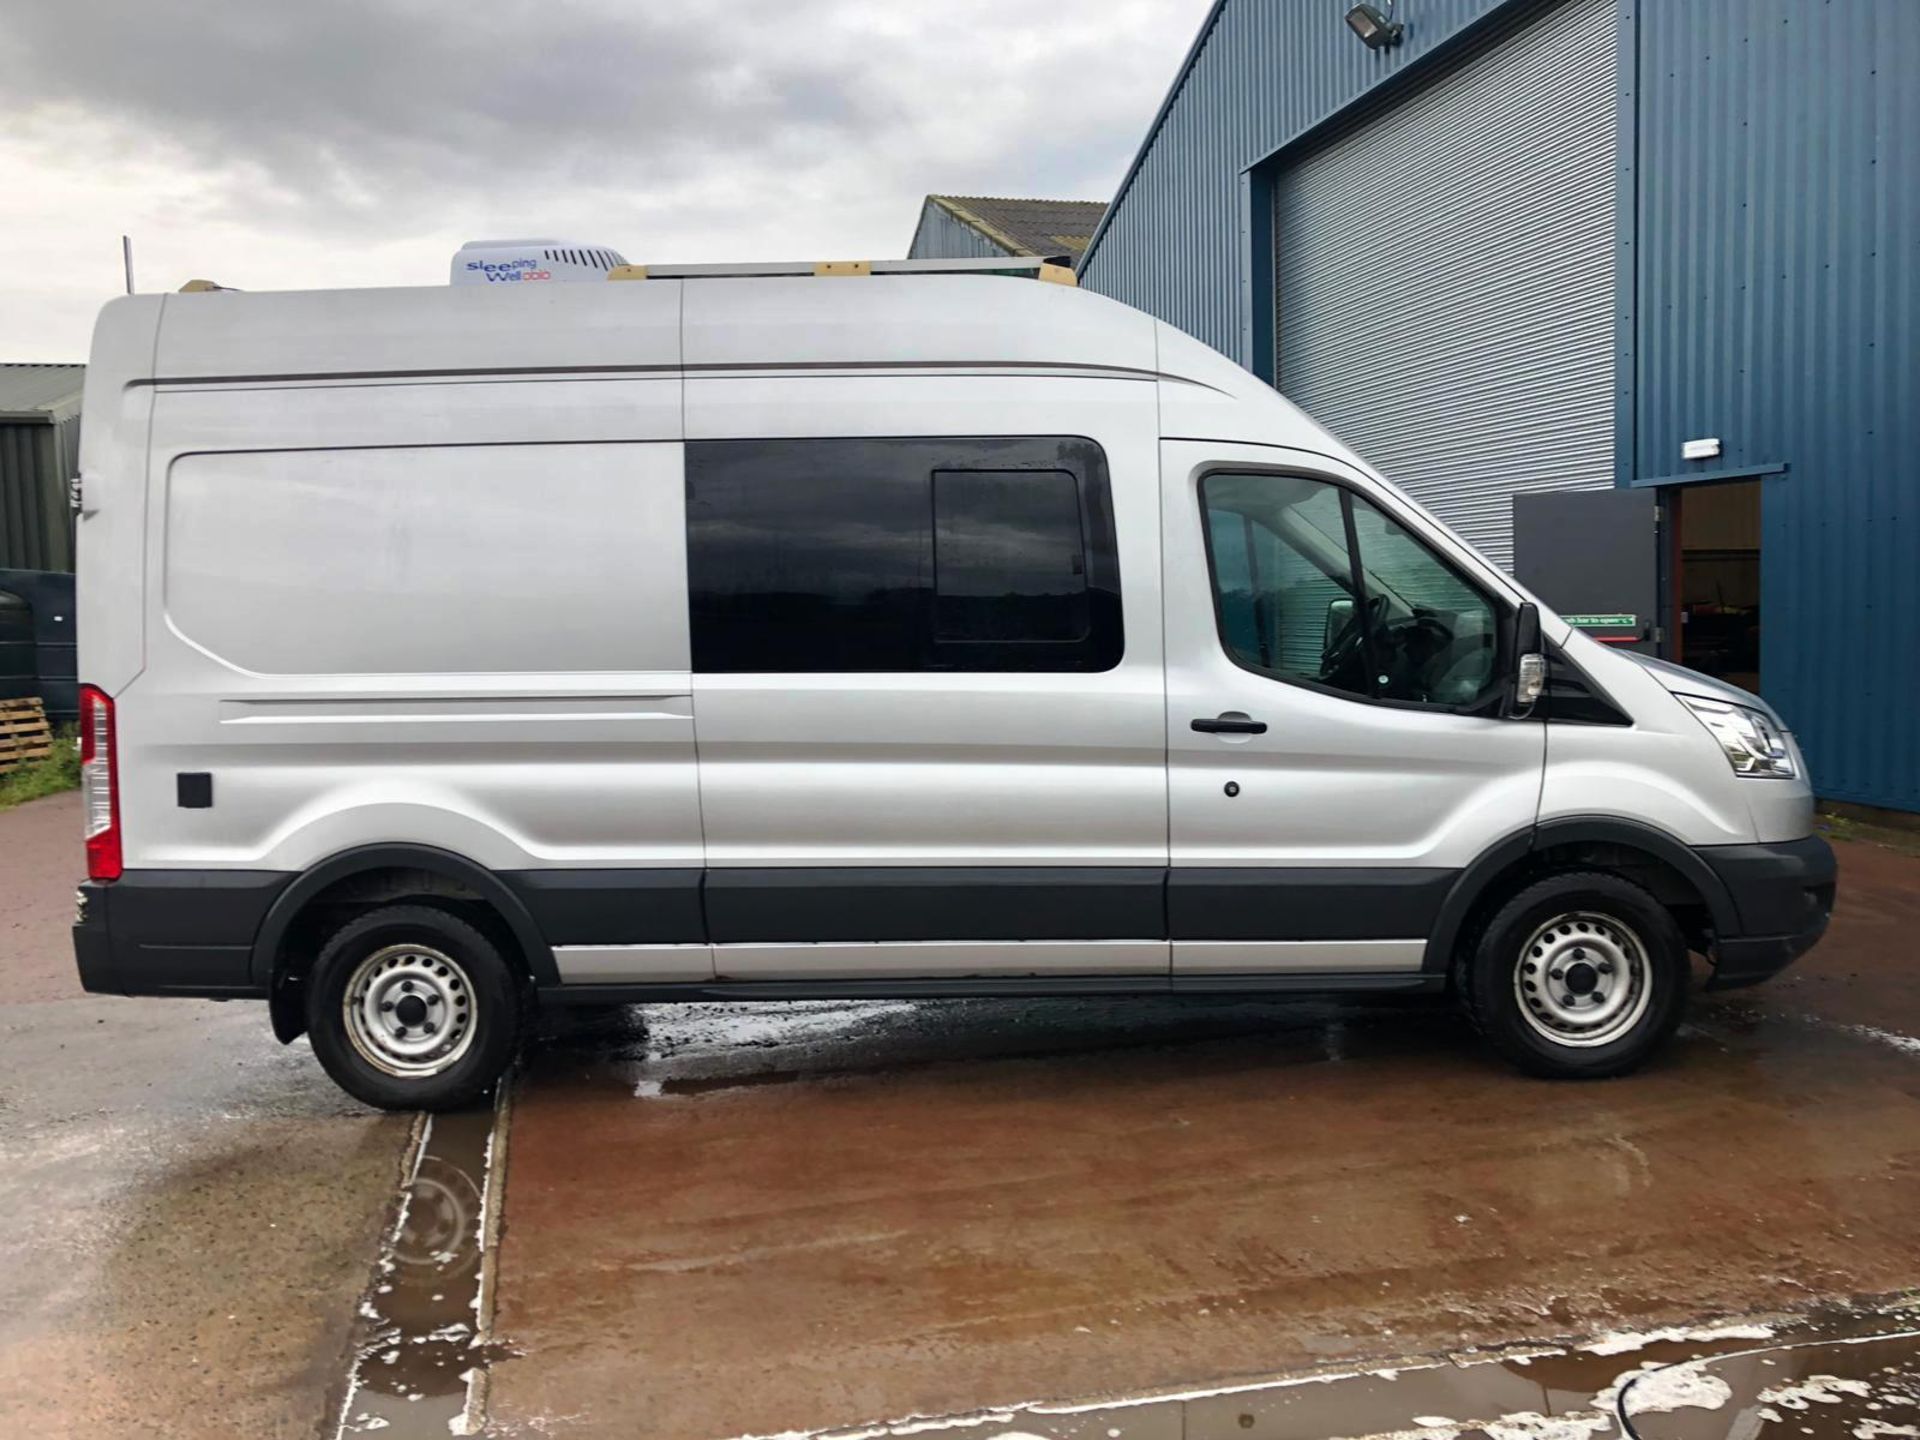 Extra Lot - Ford TRANSIT 350 2.2 TDCi 155PS EURO 5 FOUR WHEEL DRIVE HIGH ROOF UNIQUE TRAVELLING WORK - Image 3 of 33